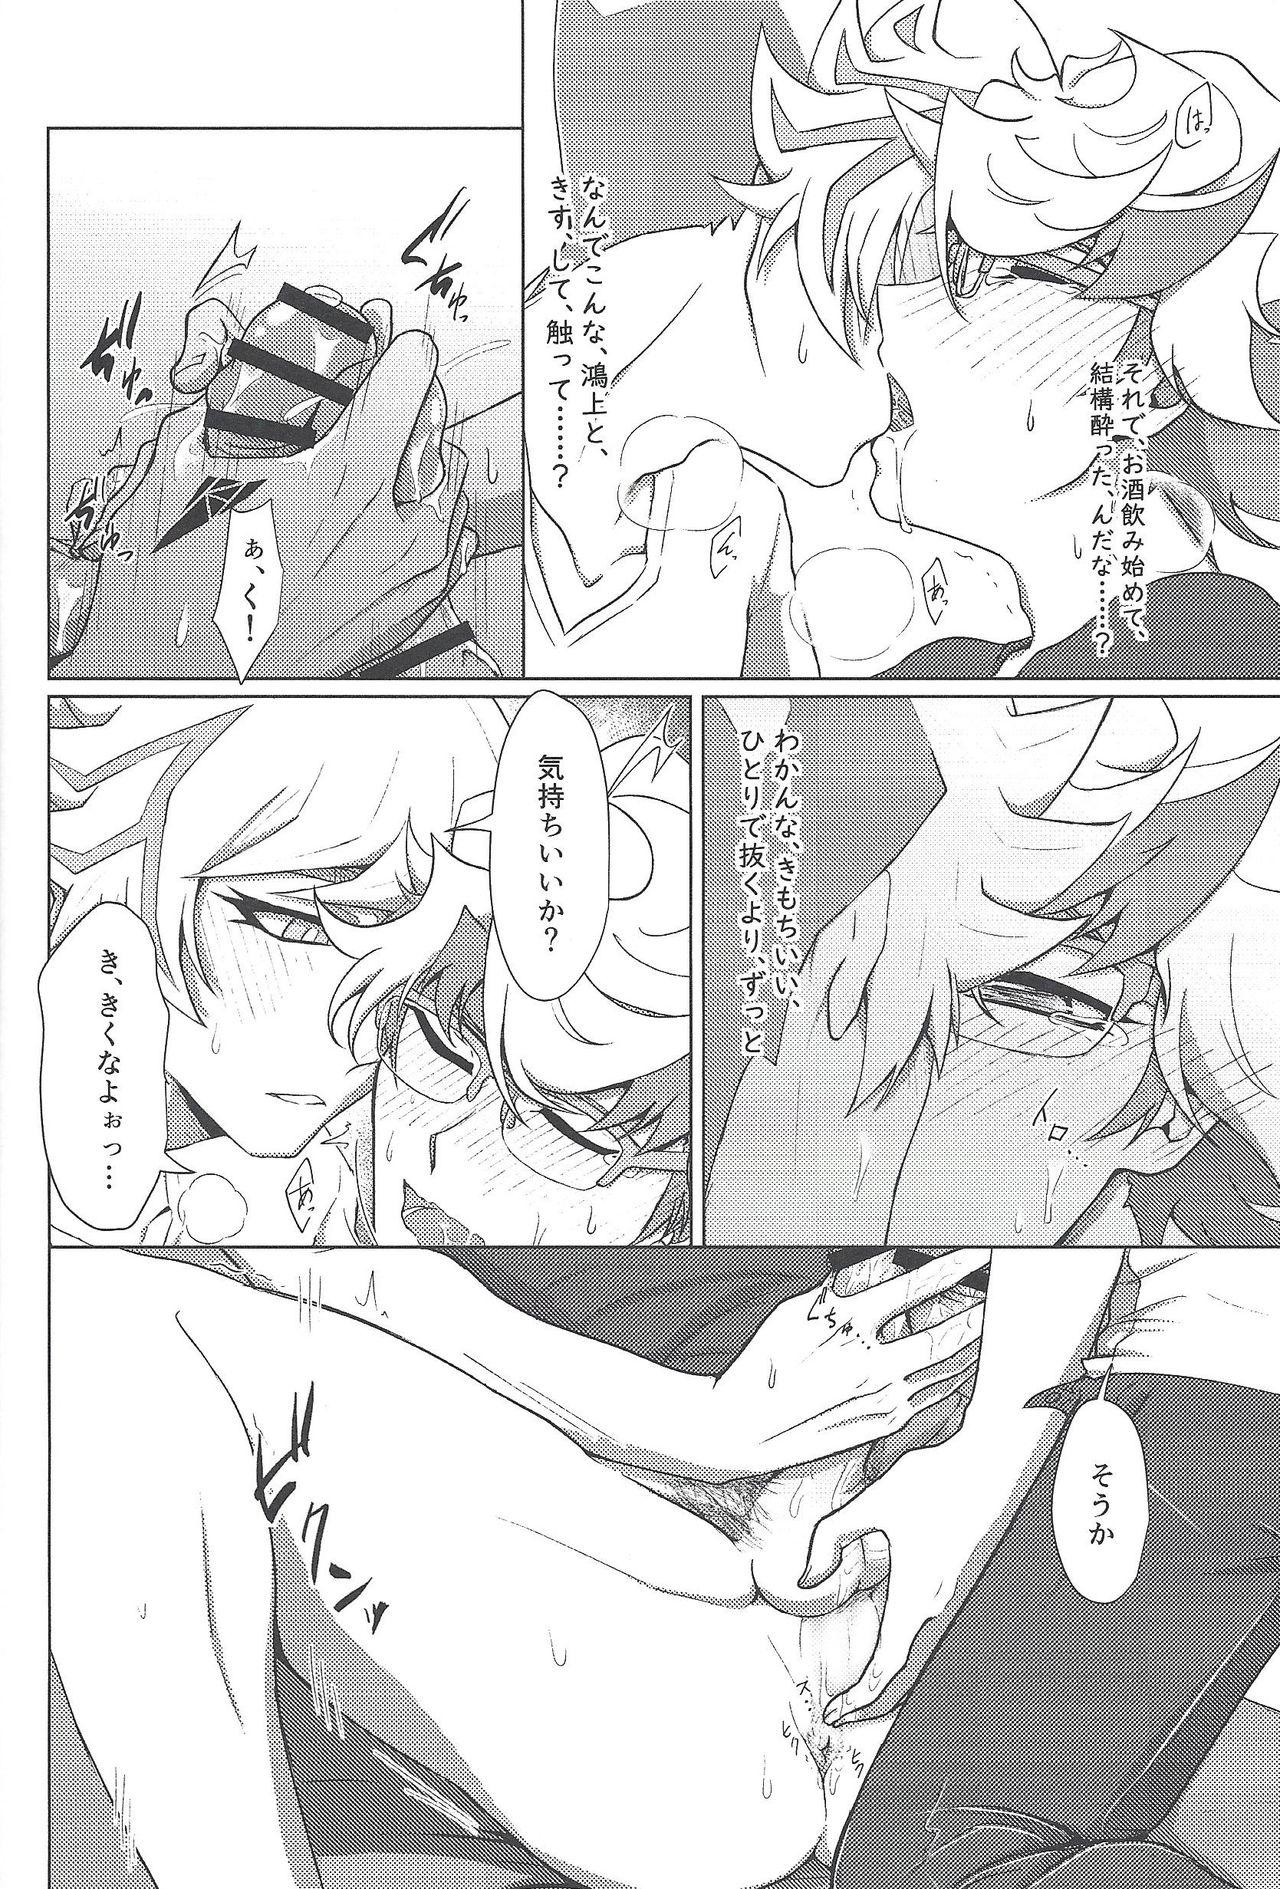 Eating Pussy Meitei Sex no Susume - Yu-gi-oh vrains Action - Page 5